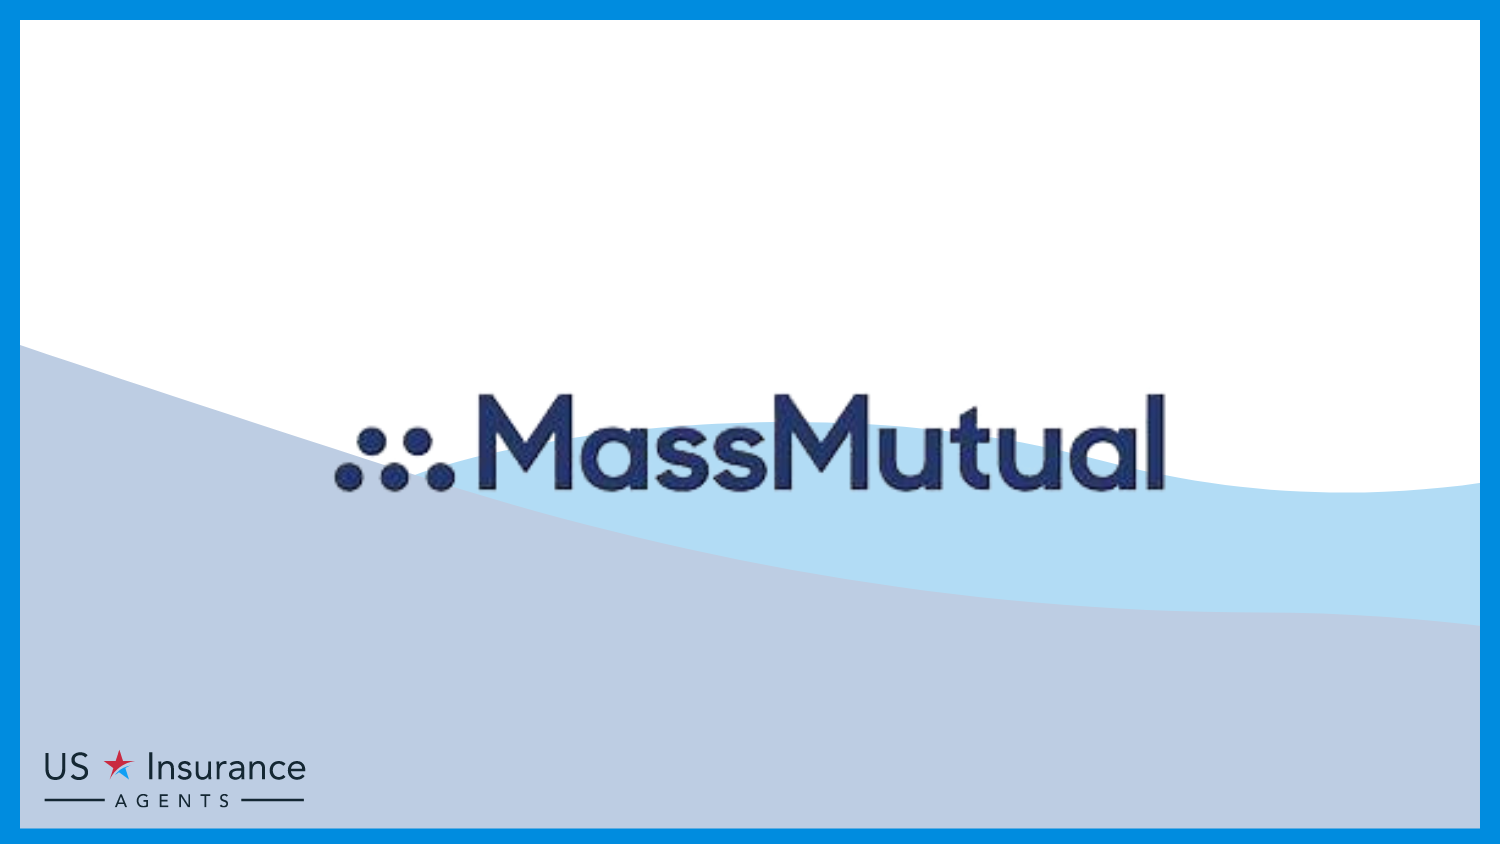 MassMutual: Best Life Insurance for Cyclists